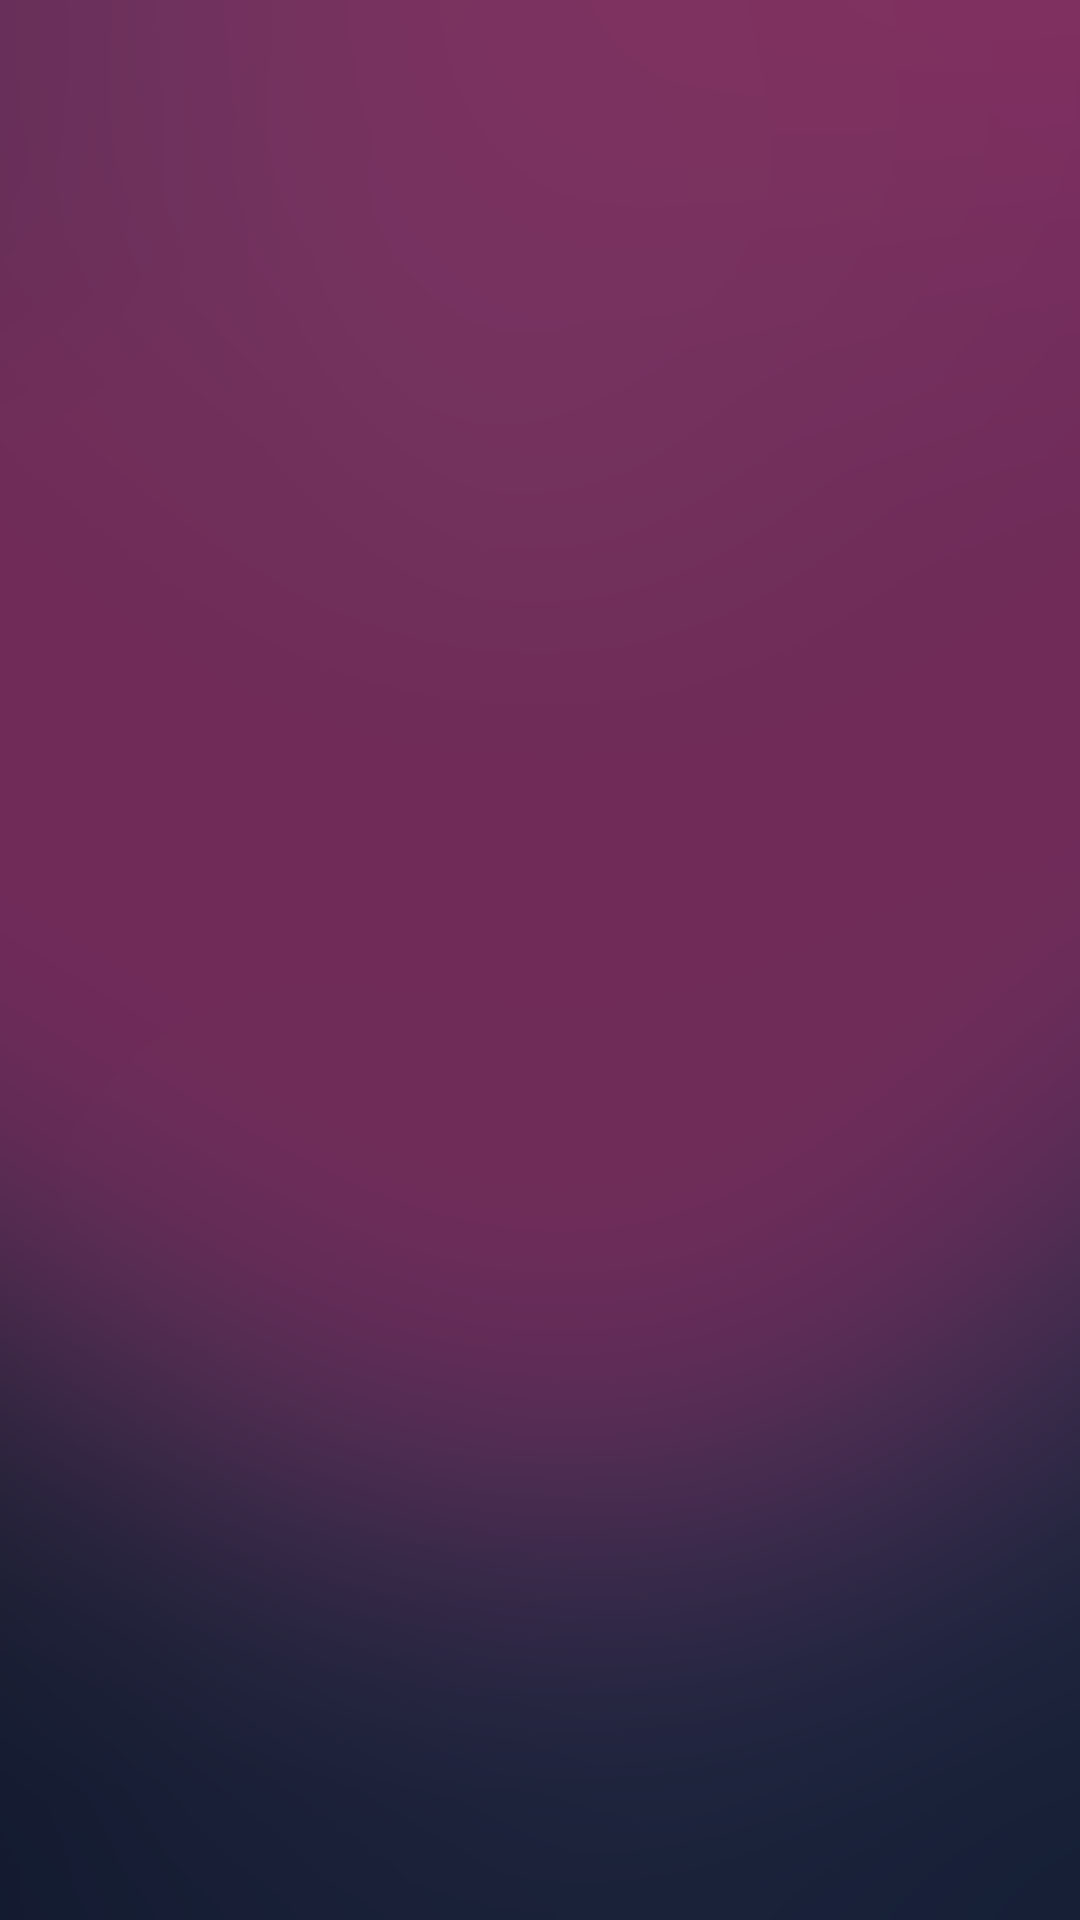 Simple Purple Gradient Samsung Android Wallpaper free download